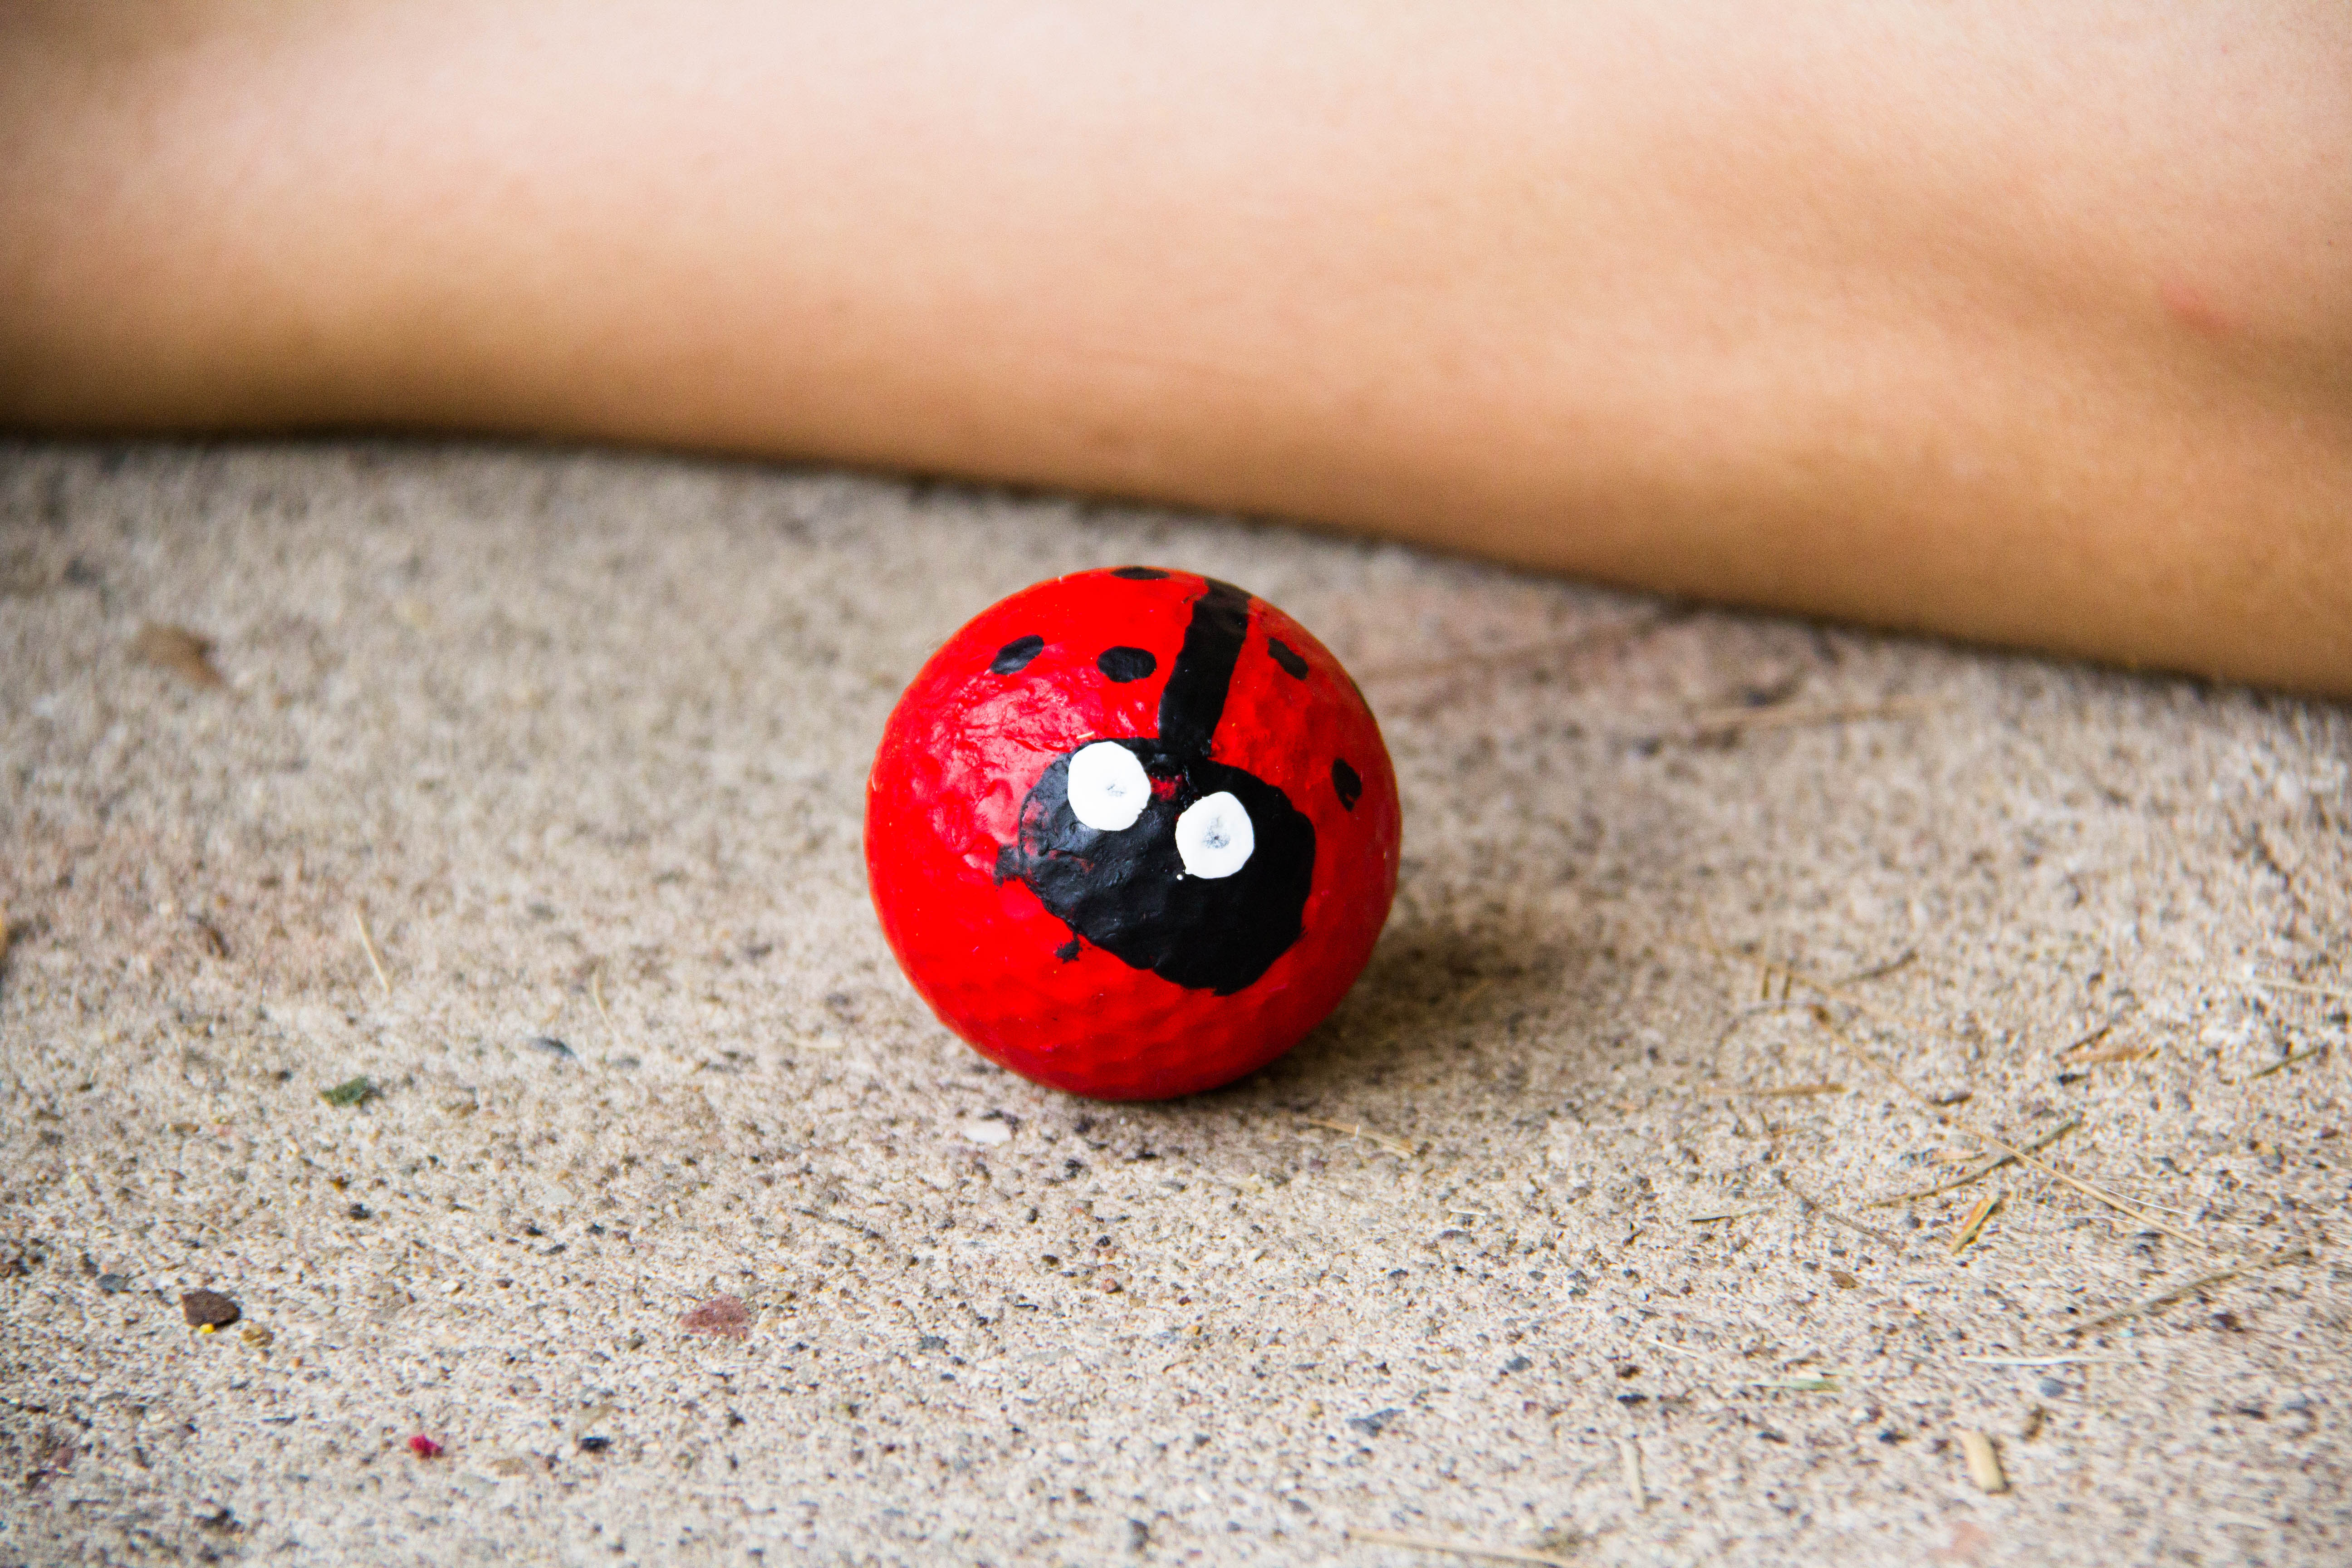 Looking for a fun garden decoration that you can make with the kids? These lady bug golf balls are easy to make and so cute.